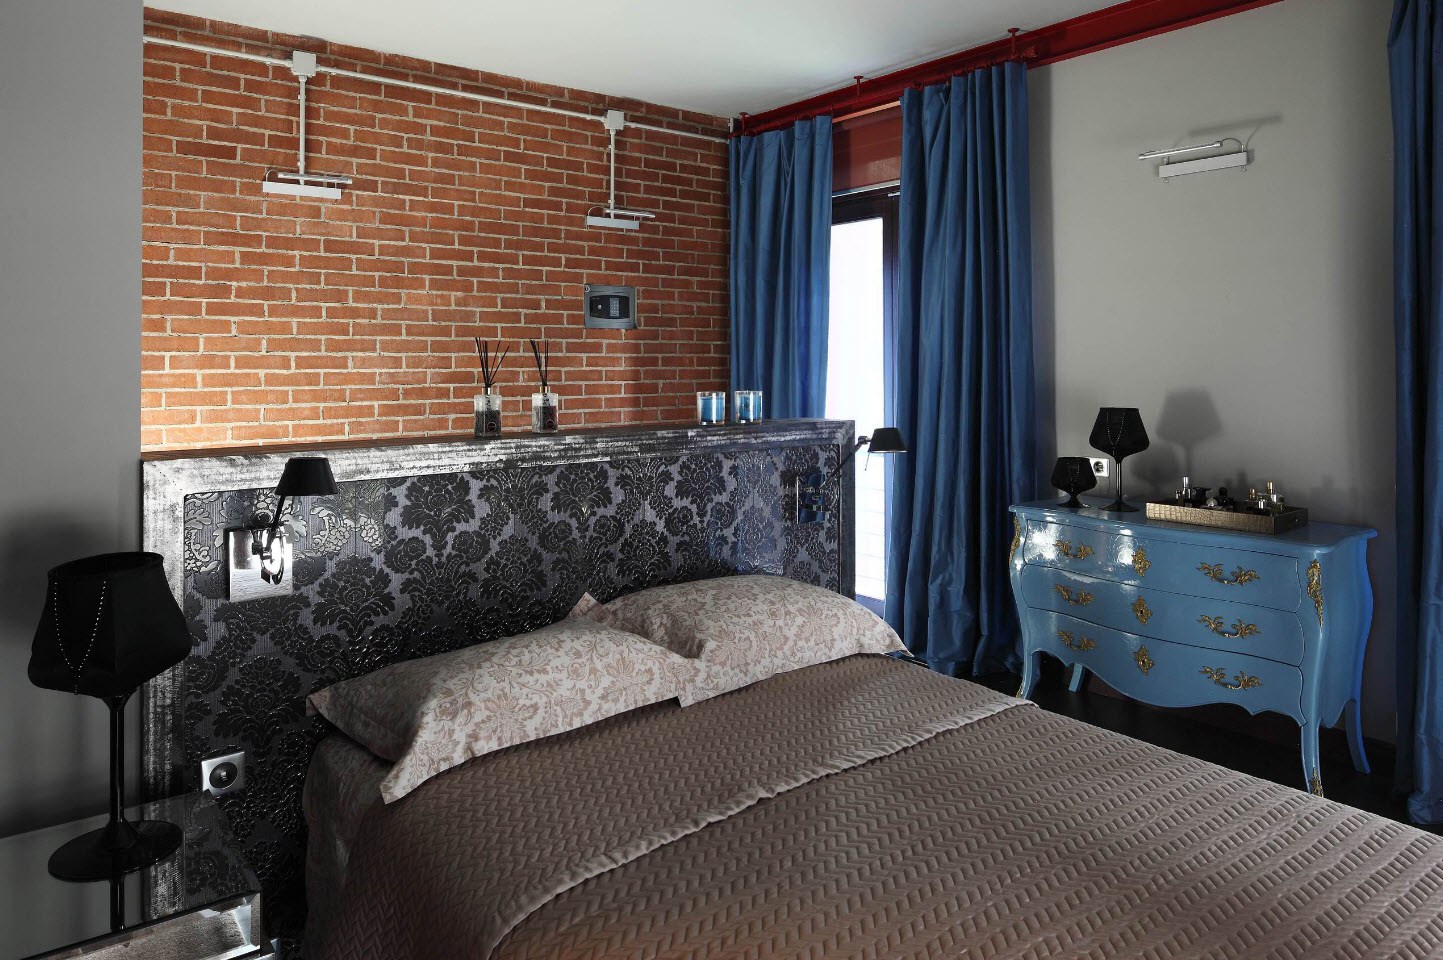 Industrial styled bedroom with brickwork wall and blue curtains